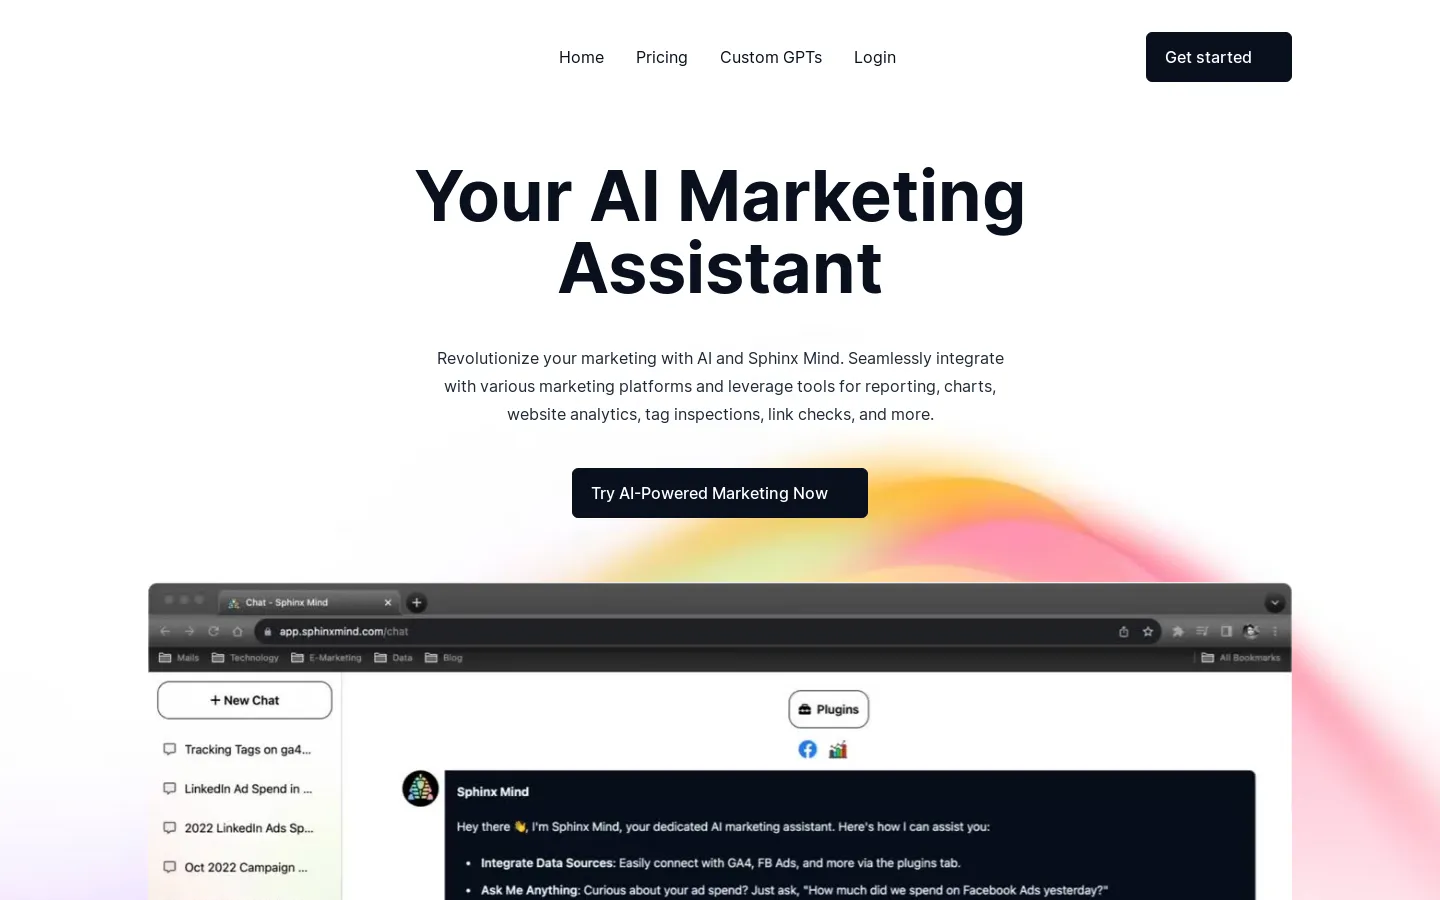 Sphinx Mind - Your AI Marketing Assistant